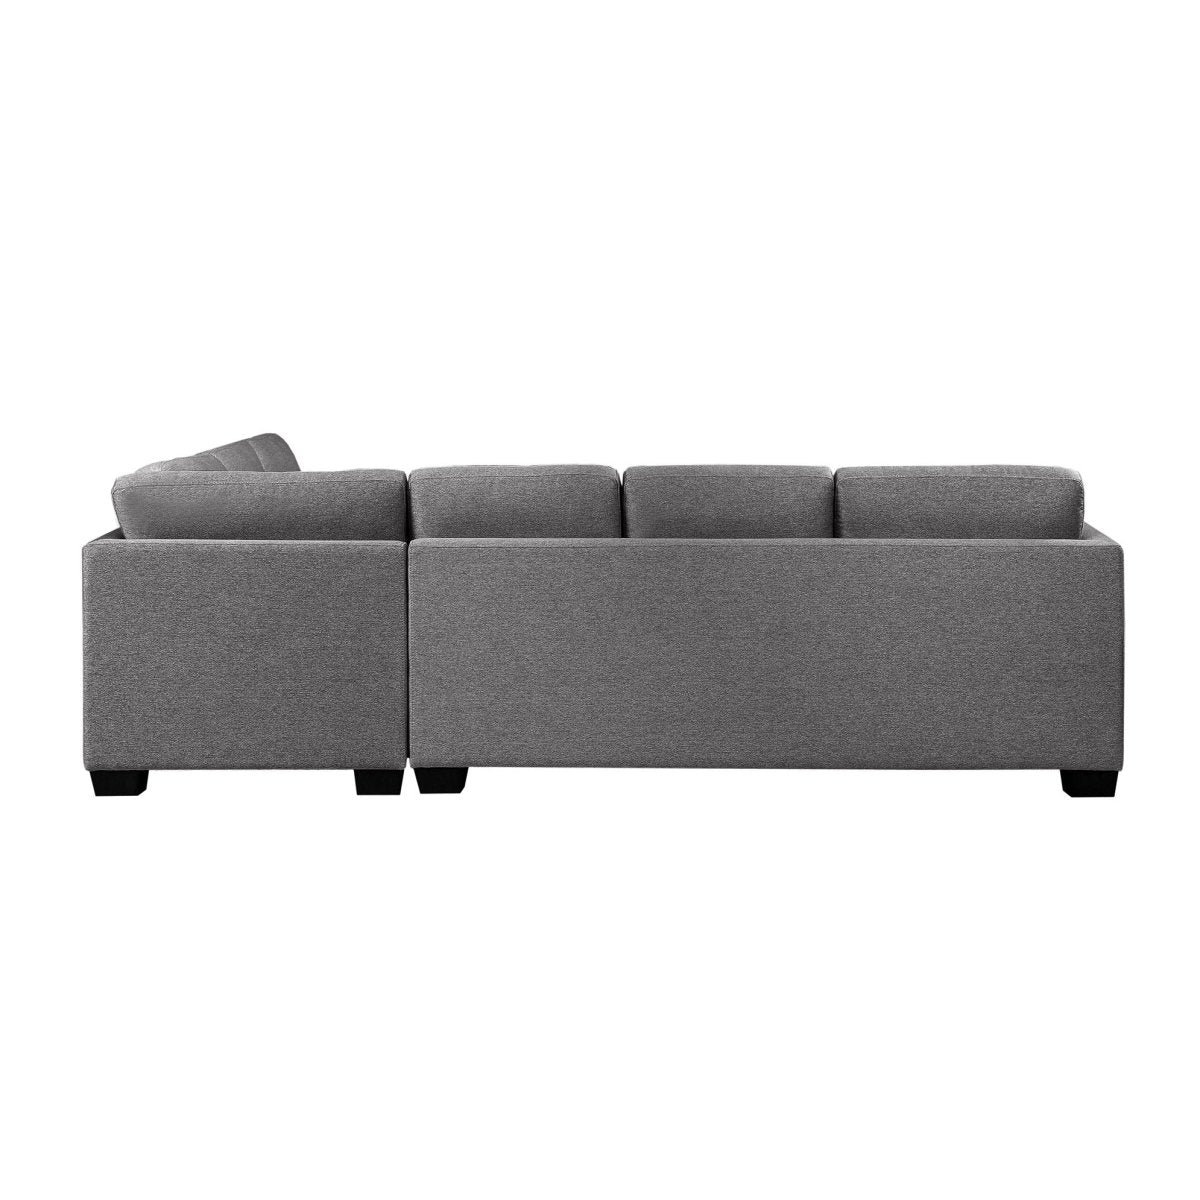 Thomasville Yvette Fabric Sectional with Storage Ottoman - Alpine Outlets